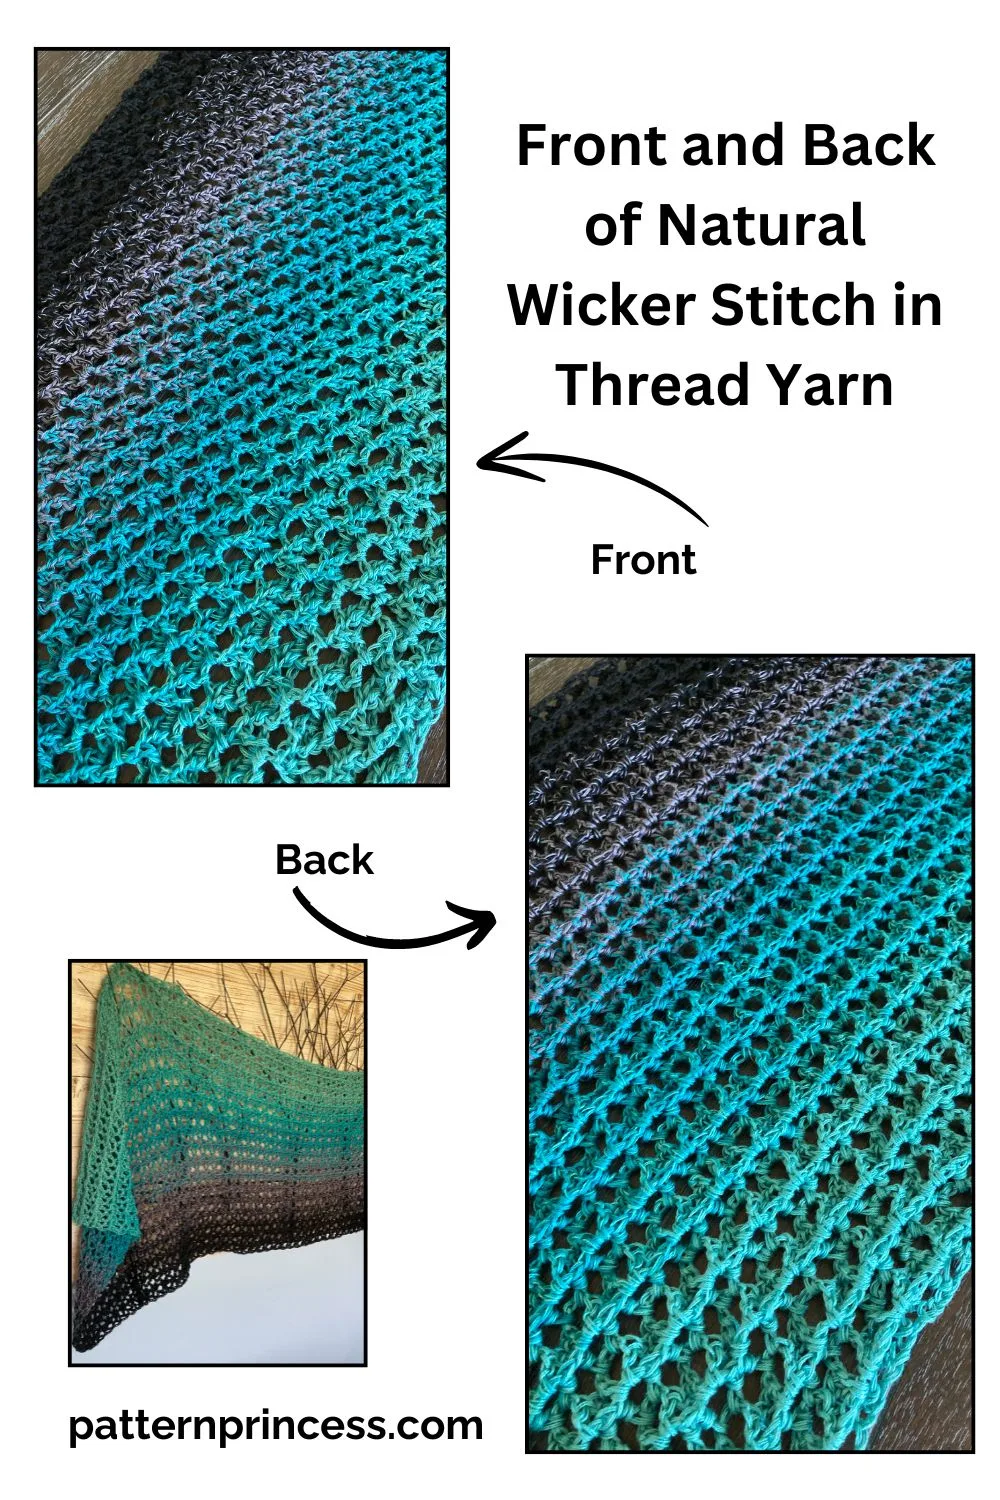 Front and Back of Natural Wicker Stitch in Thread Yarn